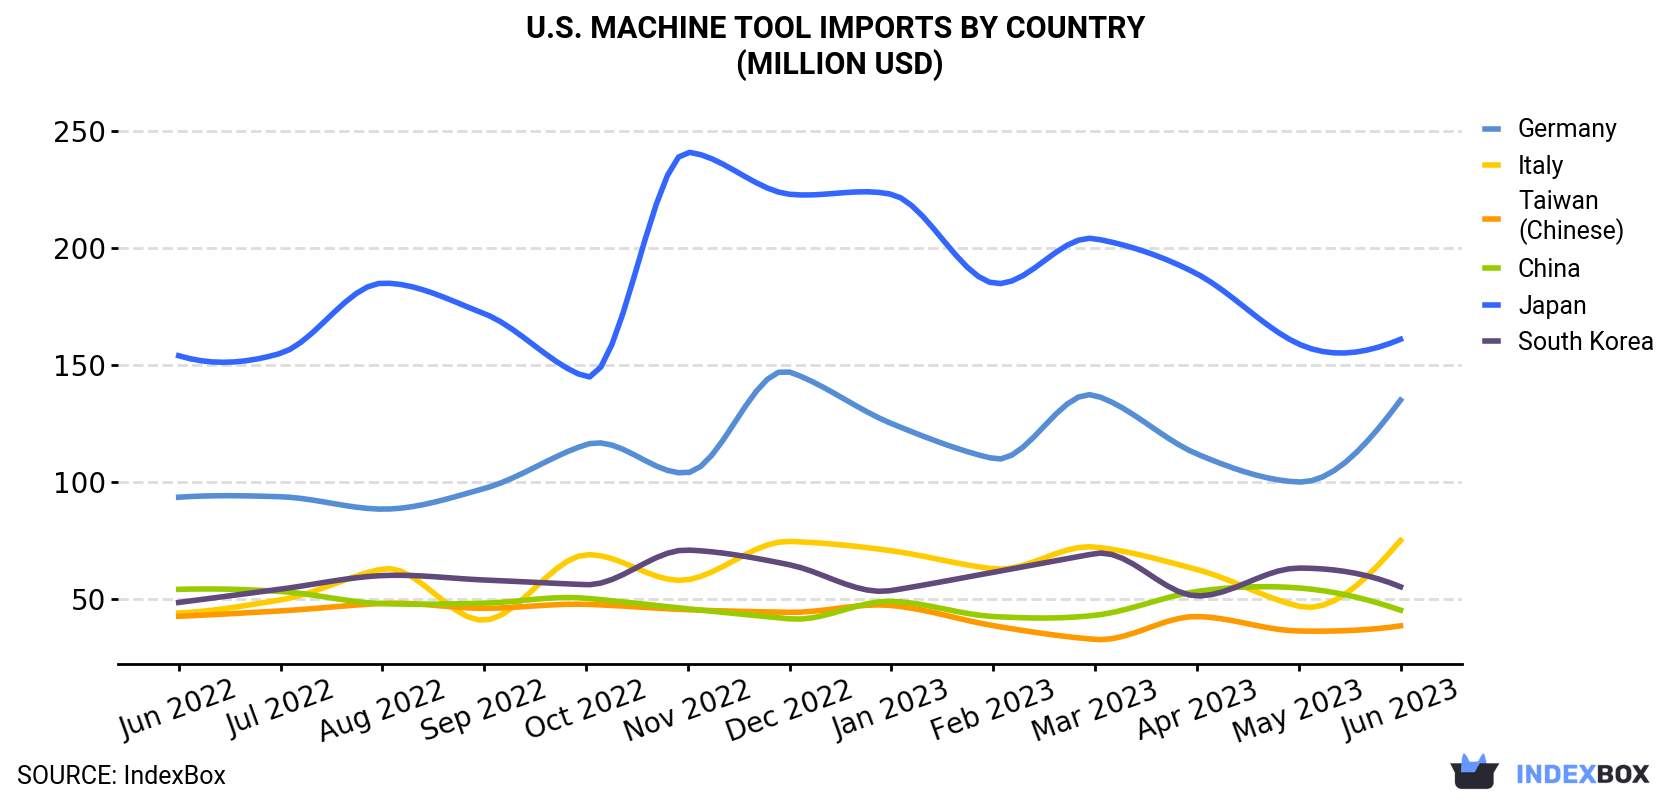 U.S. Machine Tool Imports By Country (Million USD)